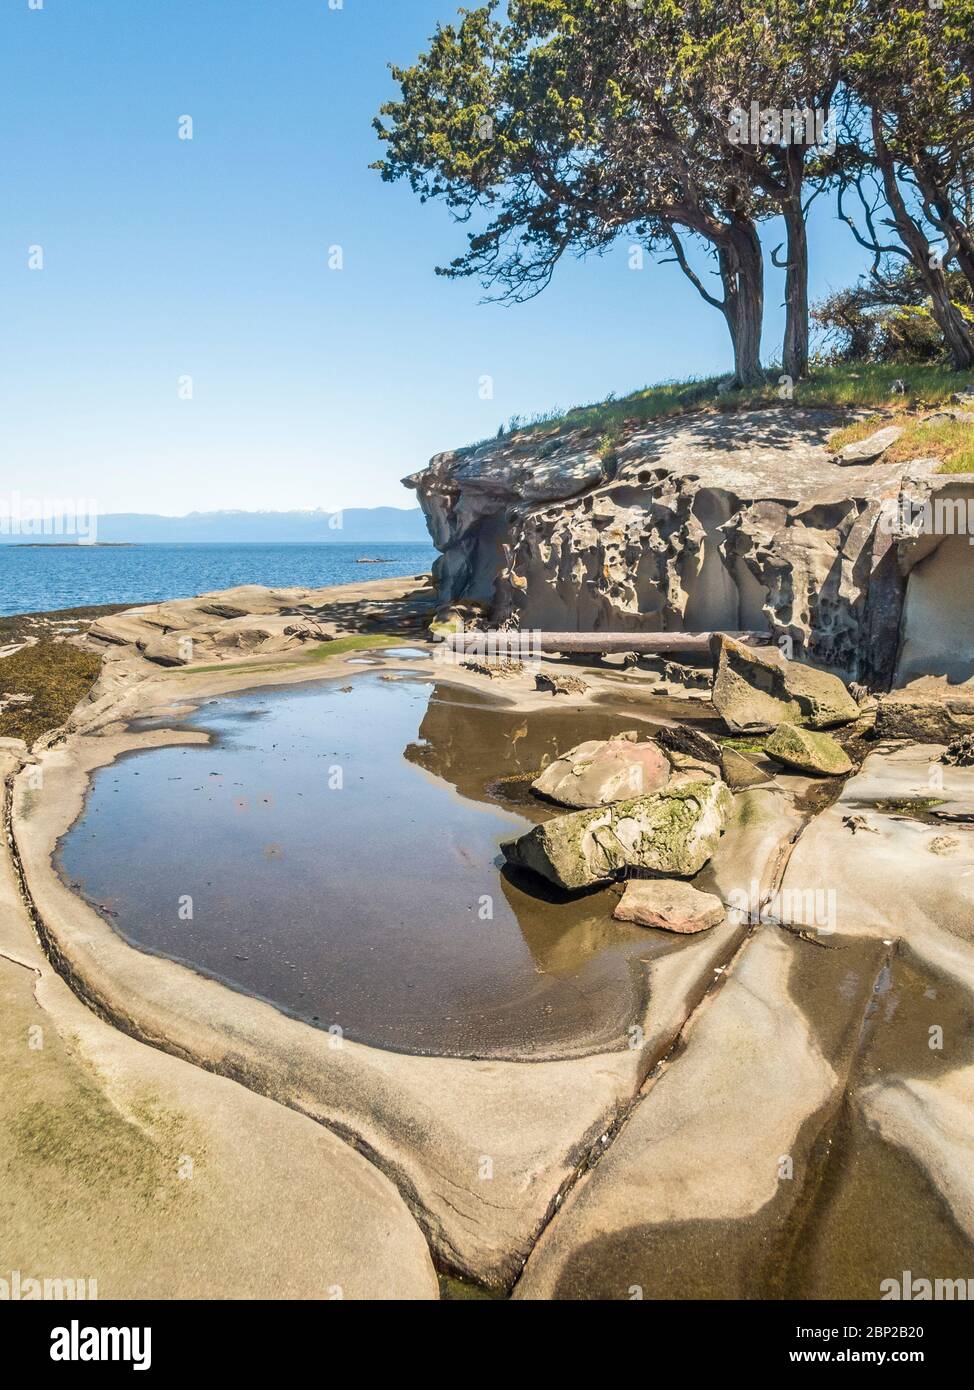 At low tide on a sunny day, a tidepool is framed by eroded channels in the smooth sandstone beach on an islet in British Columbia's Flat Top Islands. Stock Photo